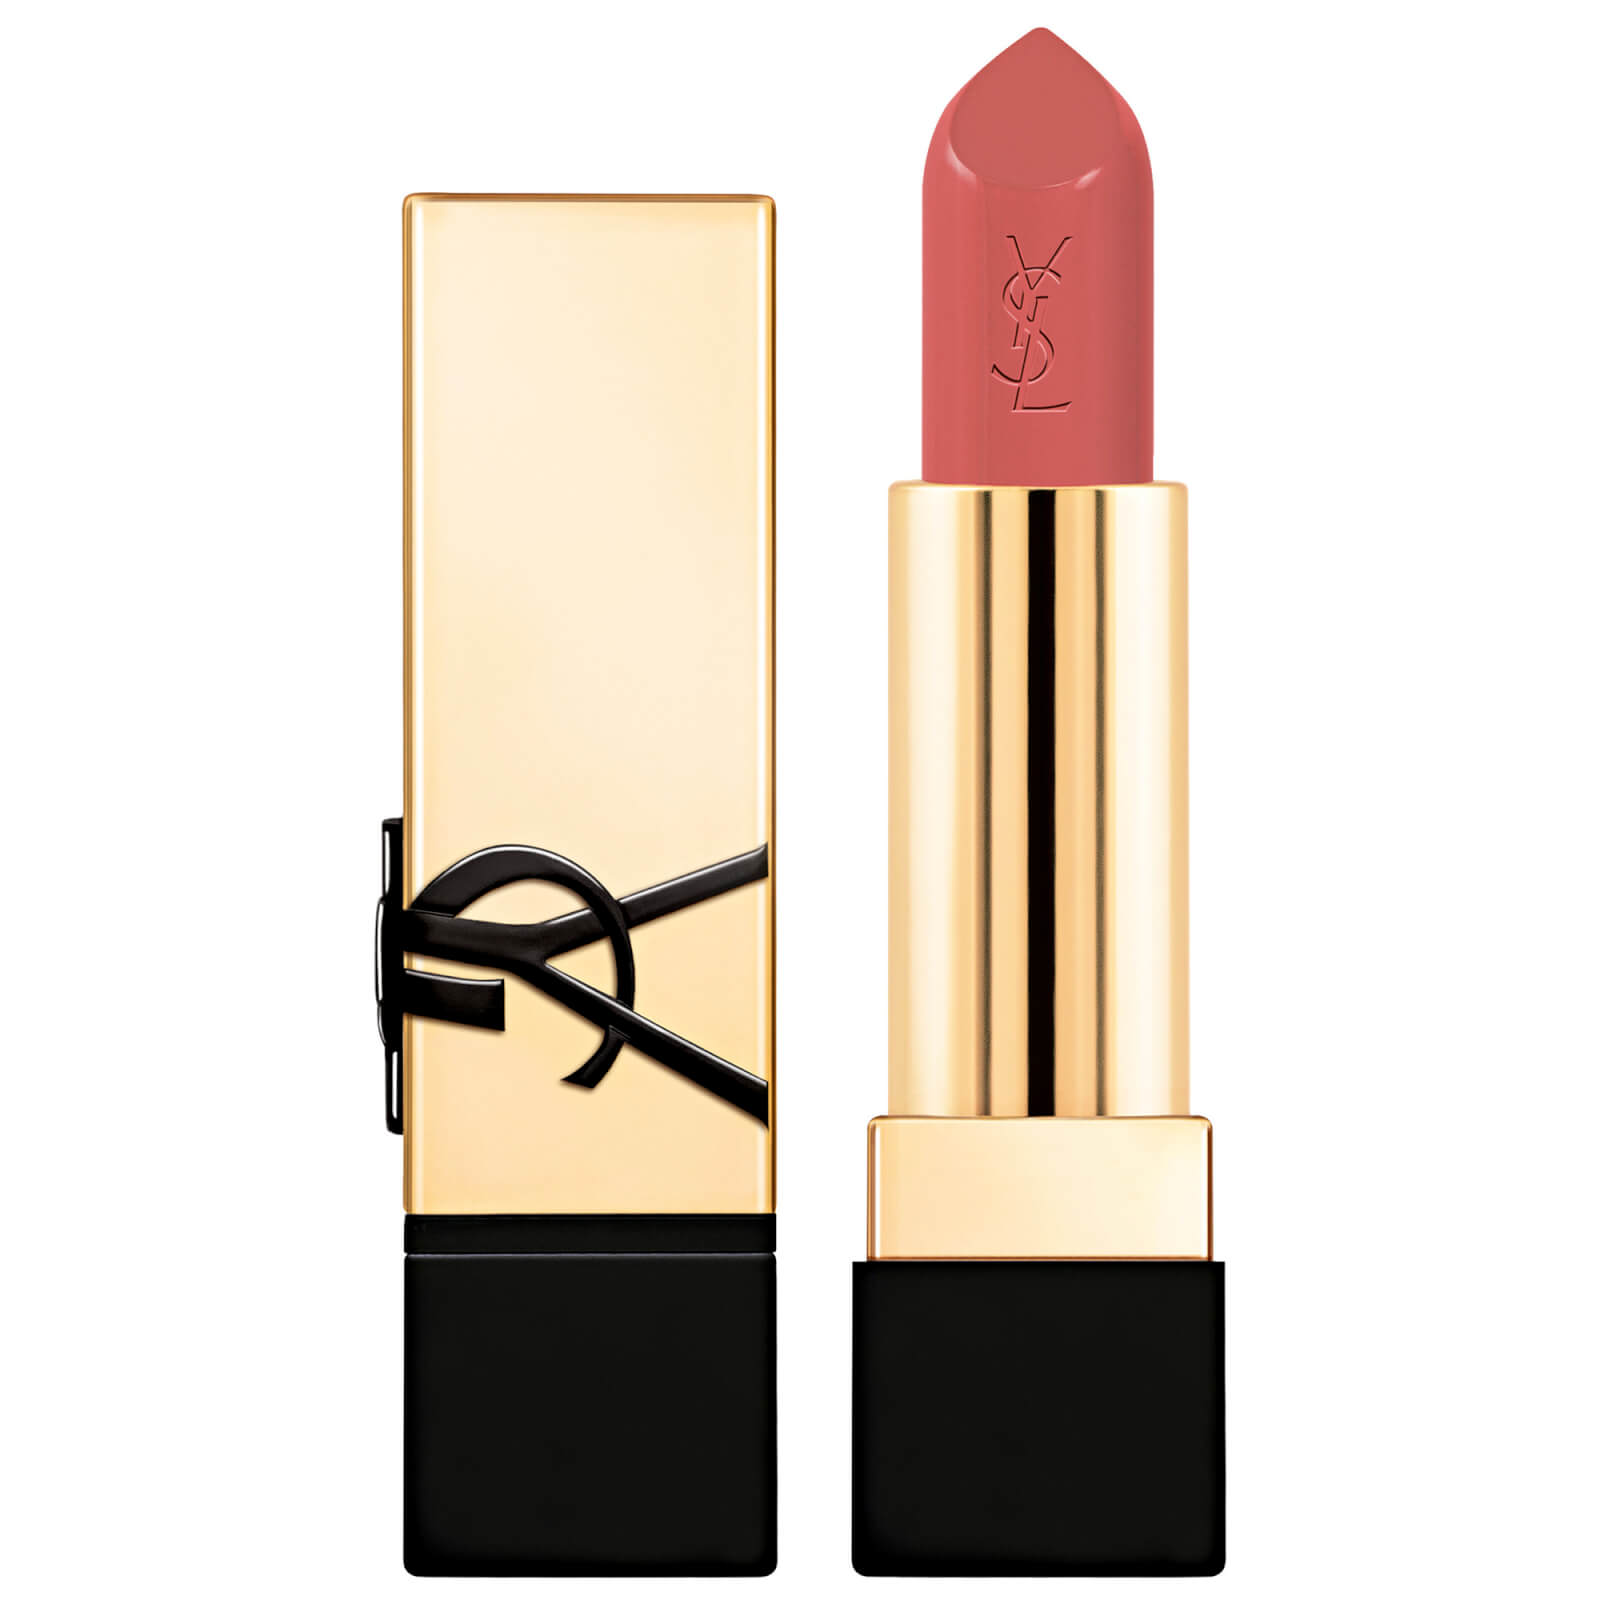 Ysl Yves Saint Laurent Rouge Pur Couture Renovation Lipstick 3g (various Shades) - N8